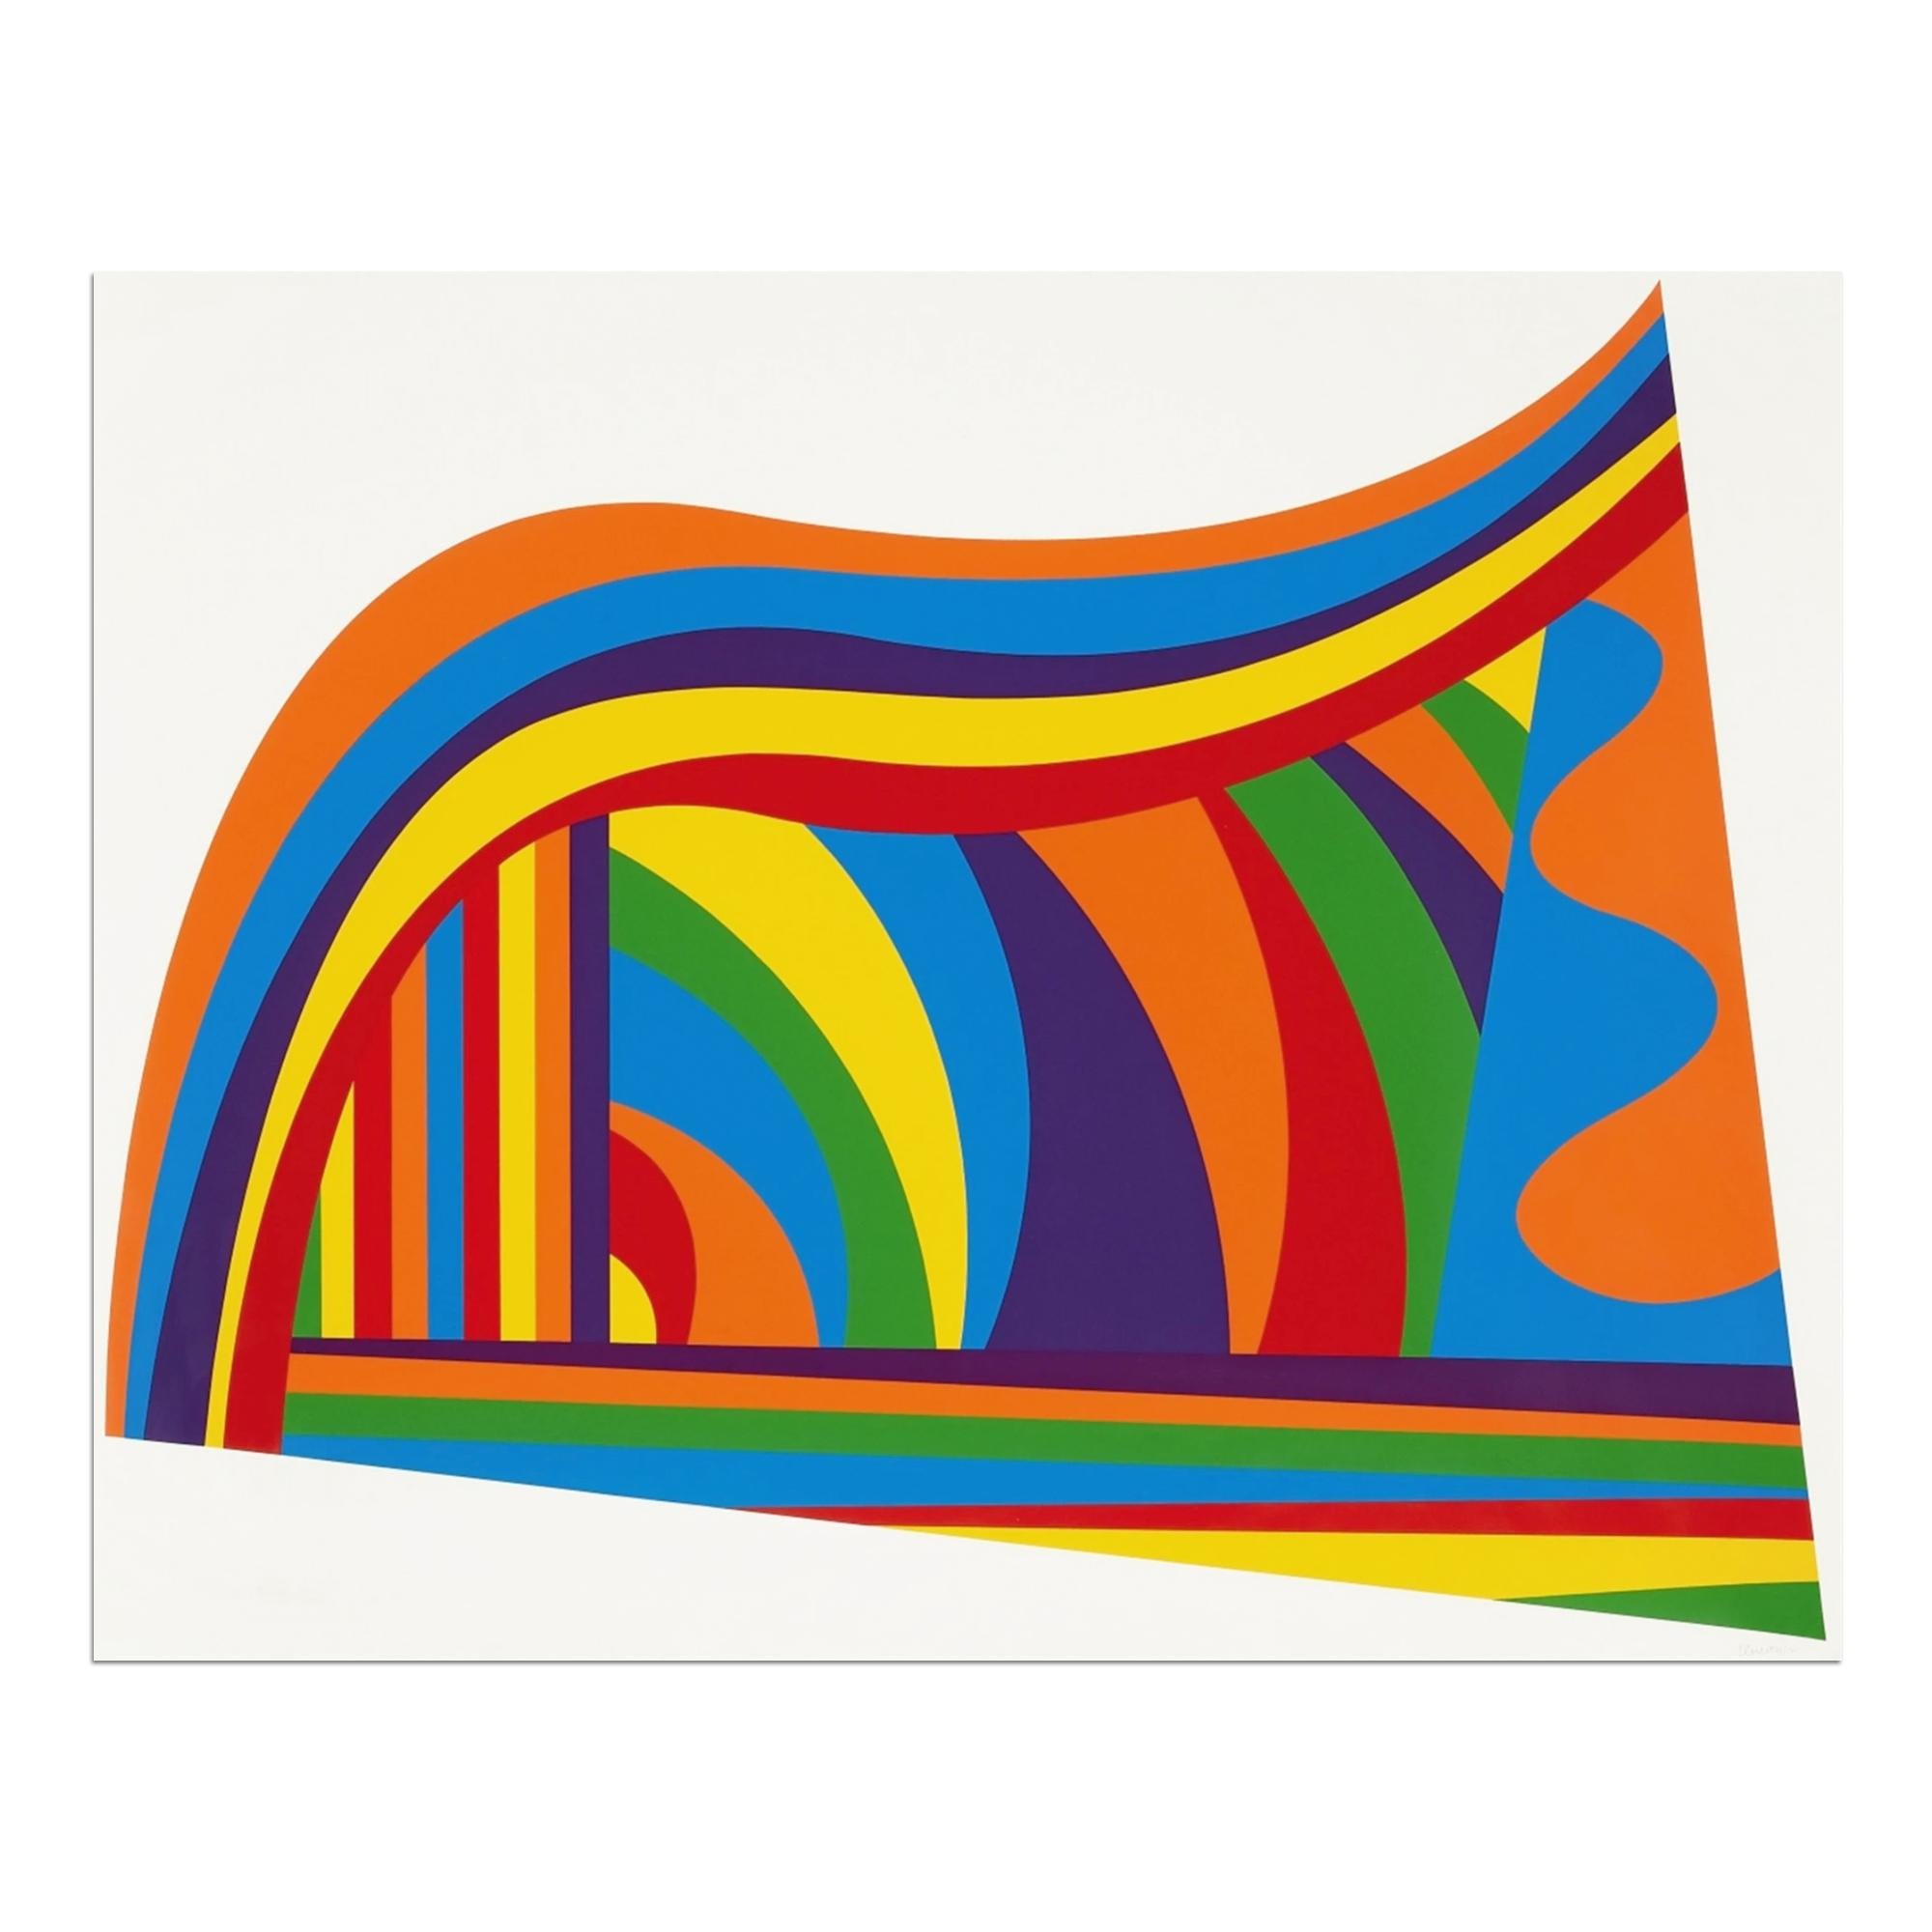 Sol Lewitt (American, 1928-2007)
Arcs and Bands in Colors 2, 1999
Medium: Screenprint on rag paper
Dimensions: 80 x 100 cm (31½ x 39¼ in)
Edition of 50 + 10 A.P.: Hand-signed and numbered
Condition: Excellent